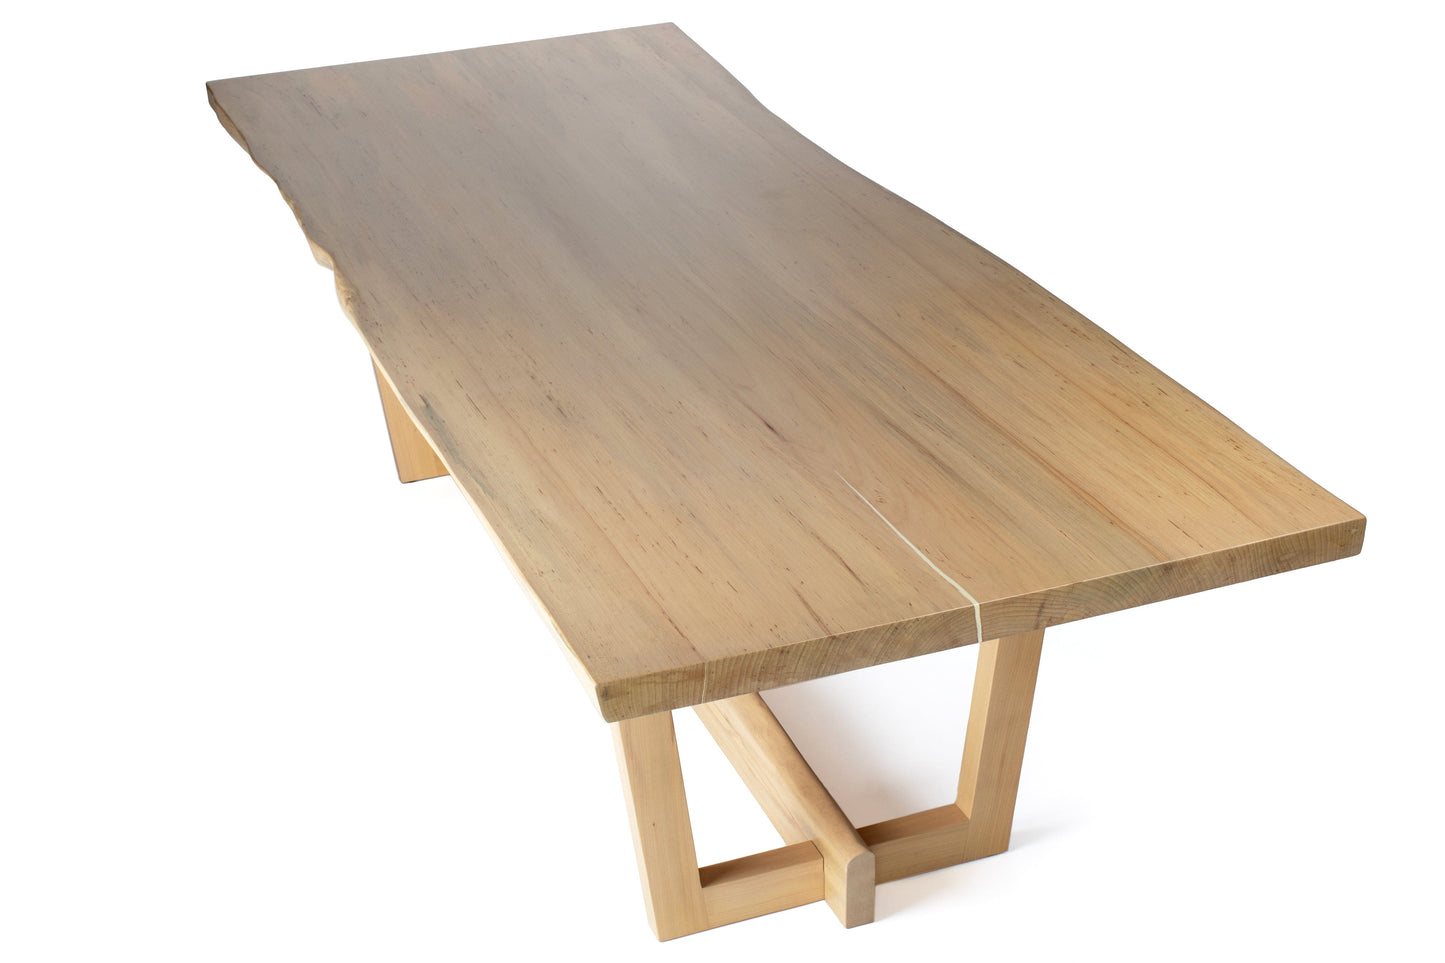 The Carpentry Shop Co. Modern Farm Style Dining Table- Spalted Maple Slab 100"L